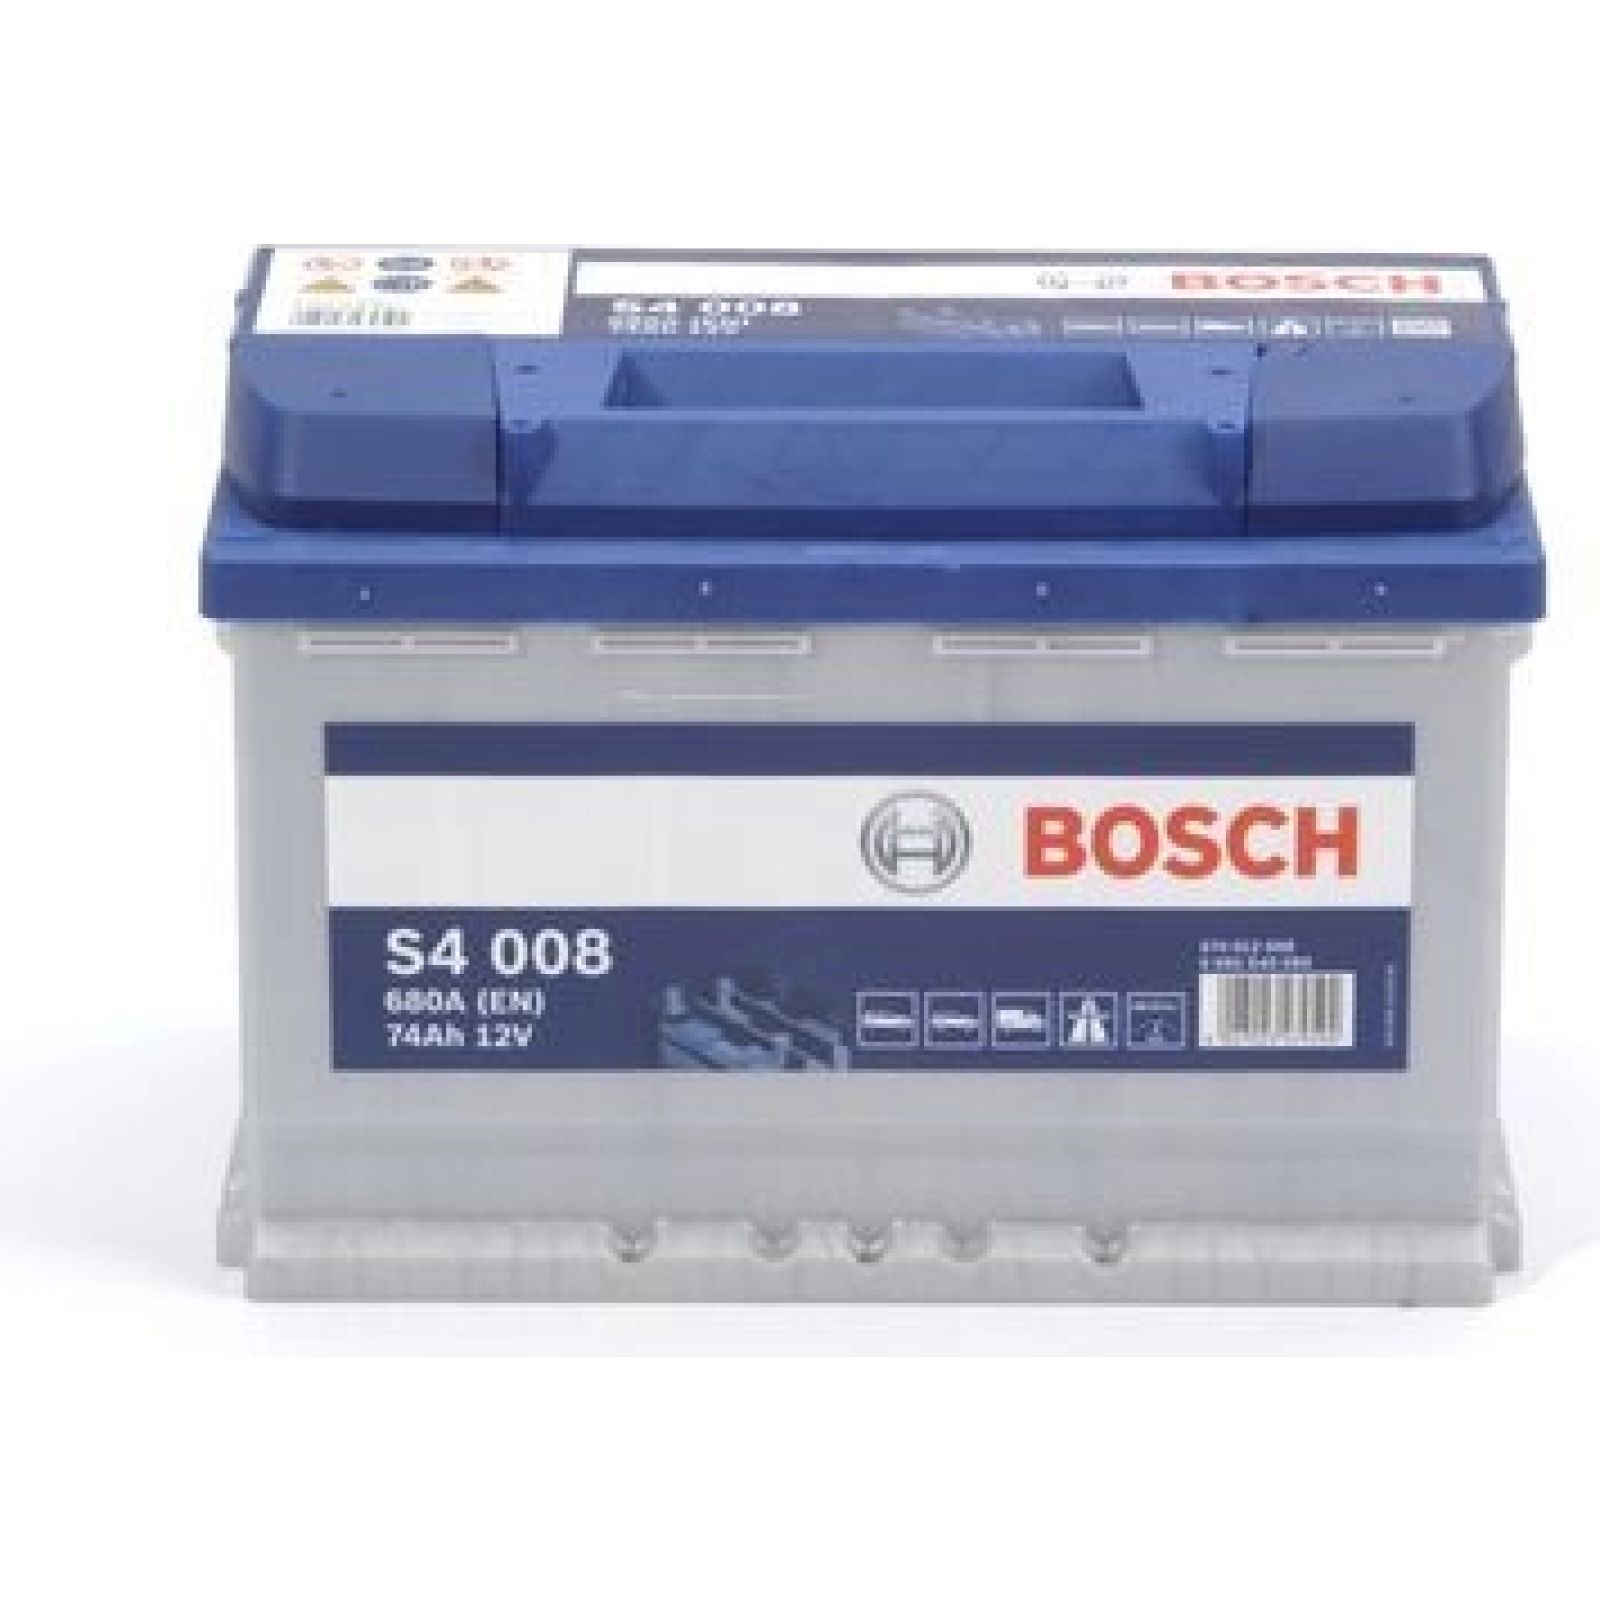 https://www.autoteile-store.at/img/product/s4-008-bosch-pkw-batterie-12v-74ah-680a-0-092-s40-080-62485/9187949ad5ced963be70a2896df15596_1600.jpg